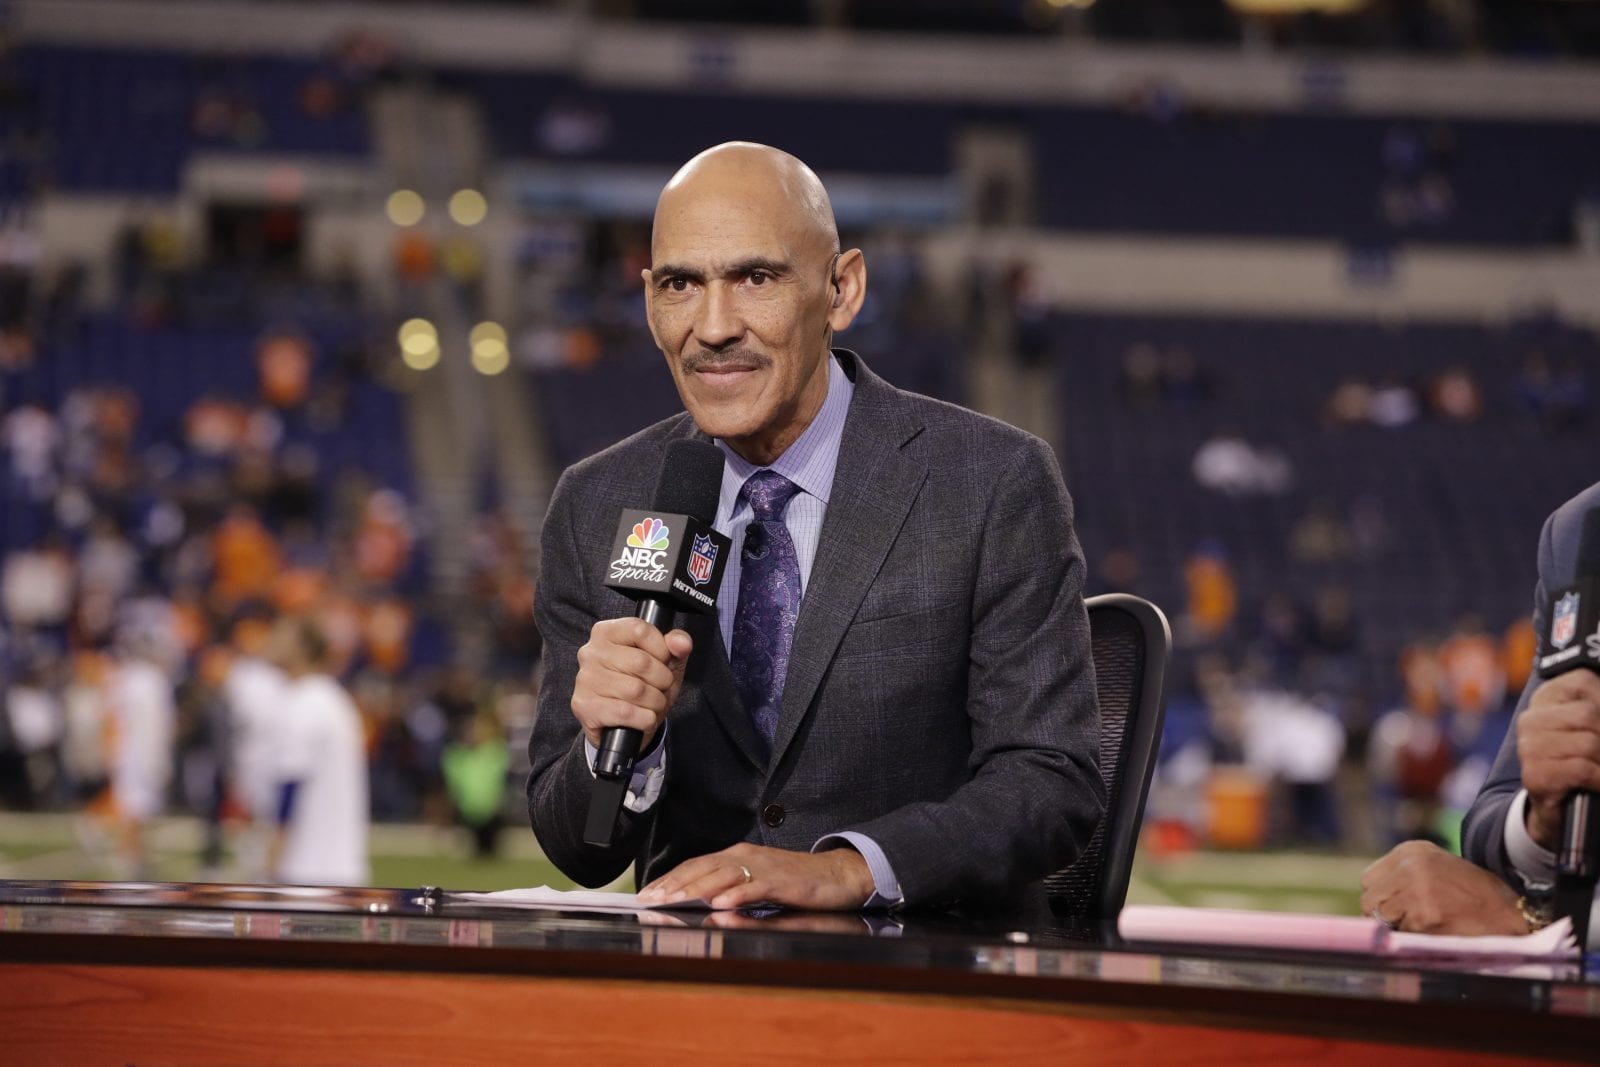 Tony Dungy: Media 'cannot begrudge' athletes who share faith in Christ - Sports Spectrum